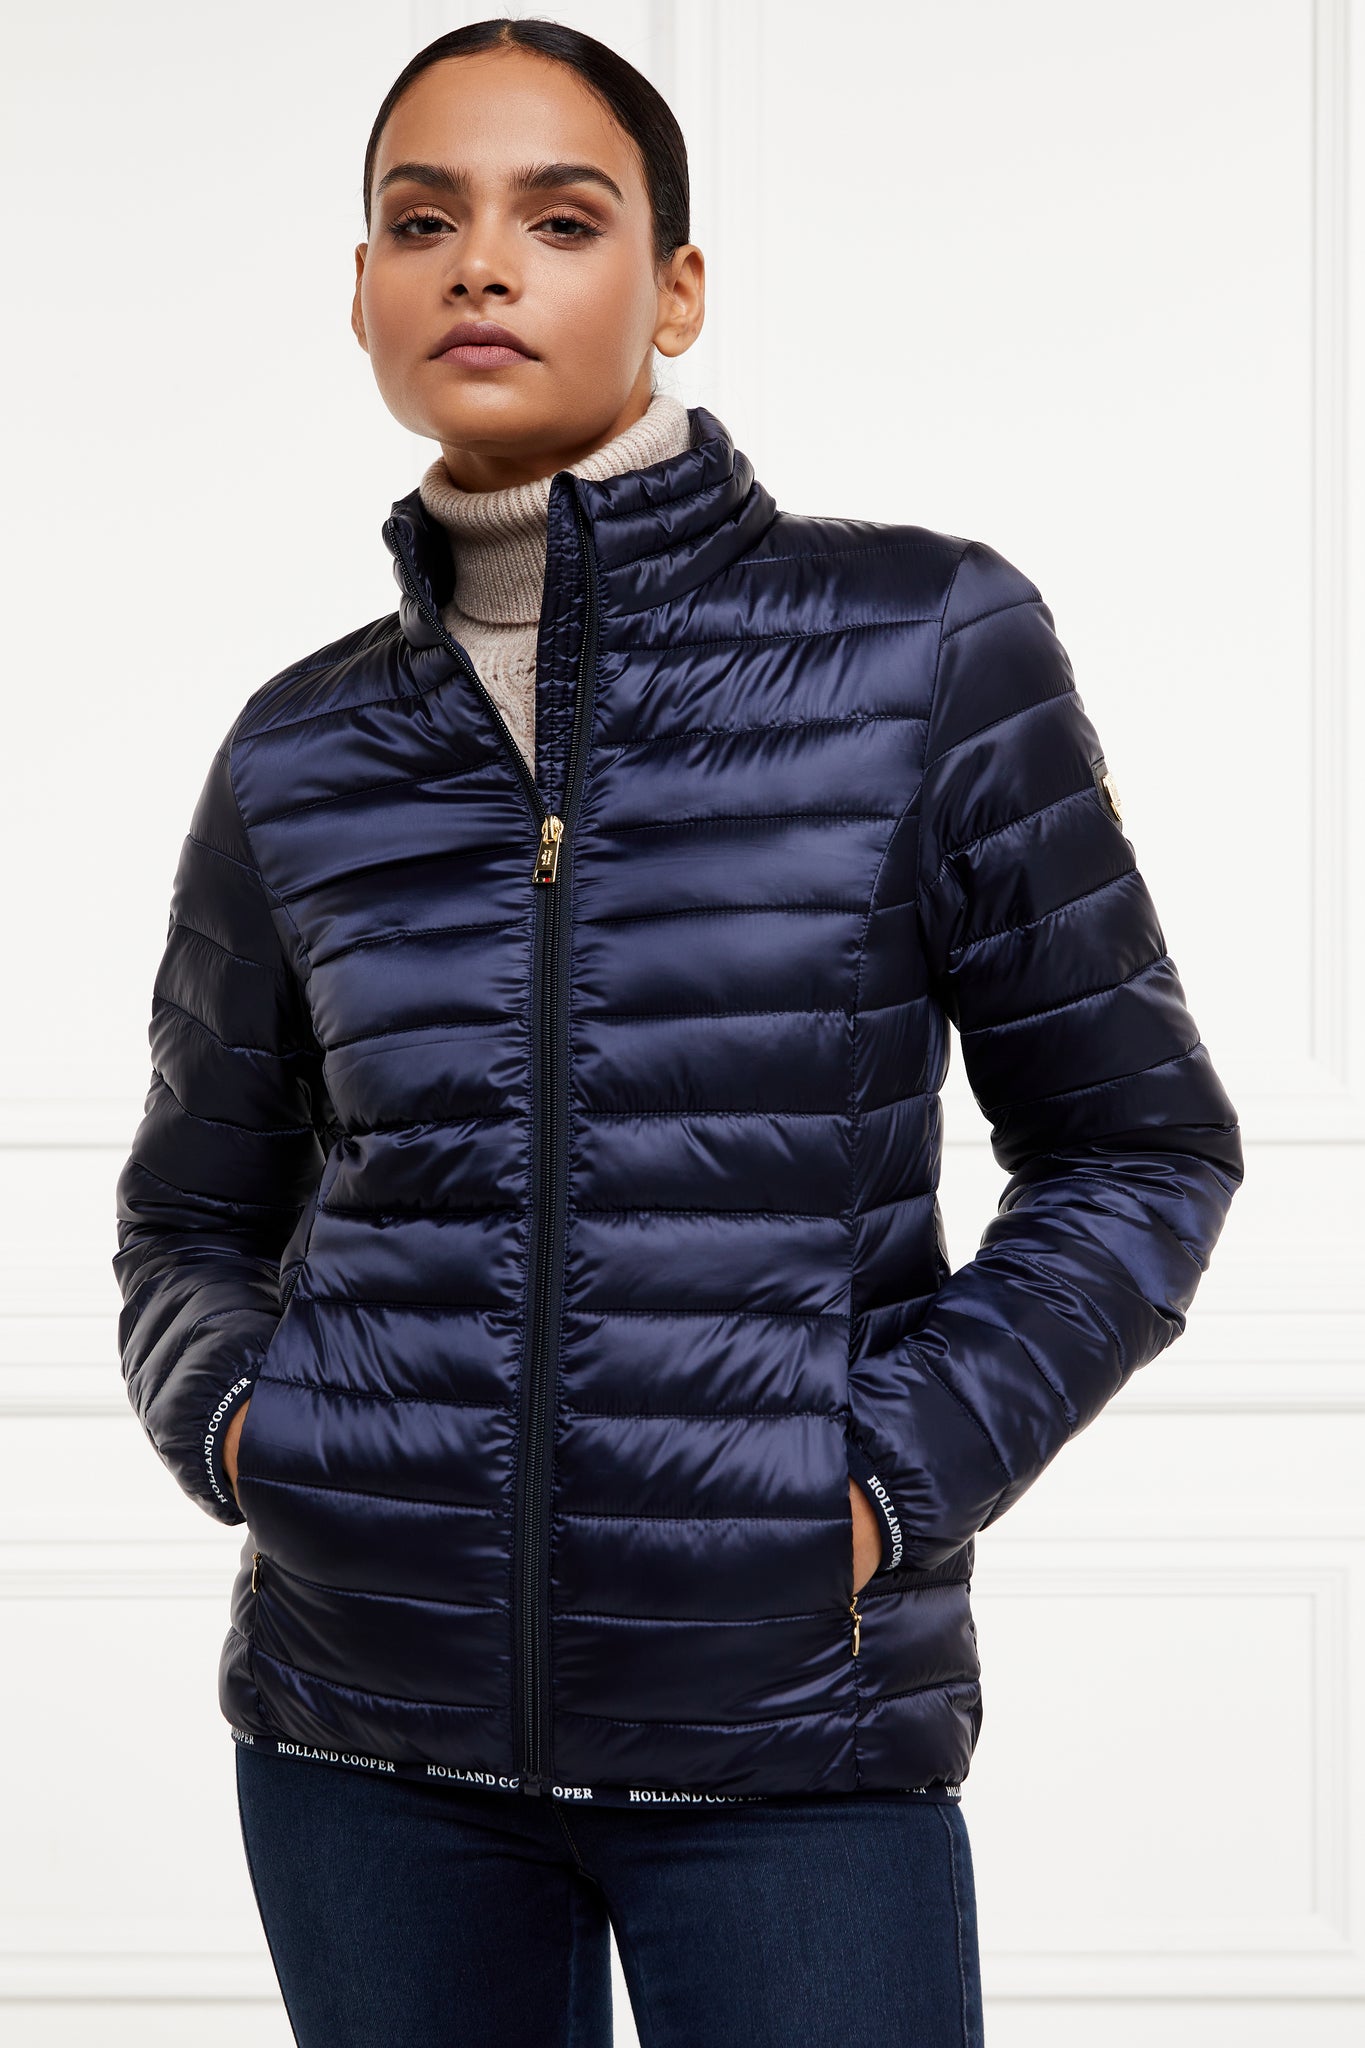 womens lightweight hoodless padded navy jacket with embroidery detail on back high neck and elasticated cuffs and hem. easily packs away into seperate small bag of the same colour with handle 